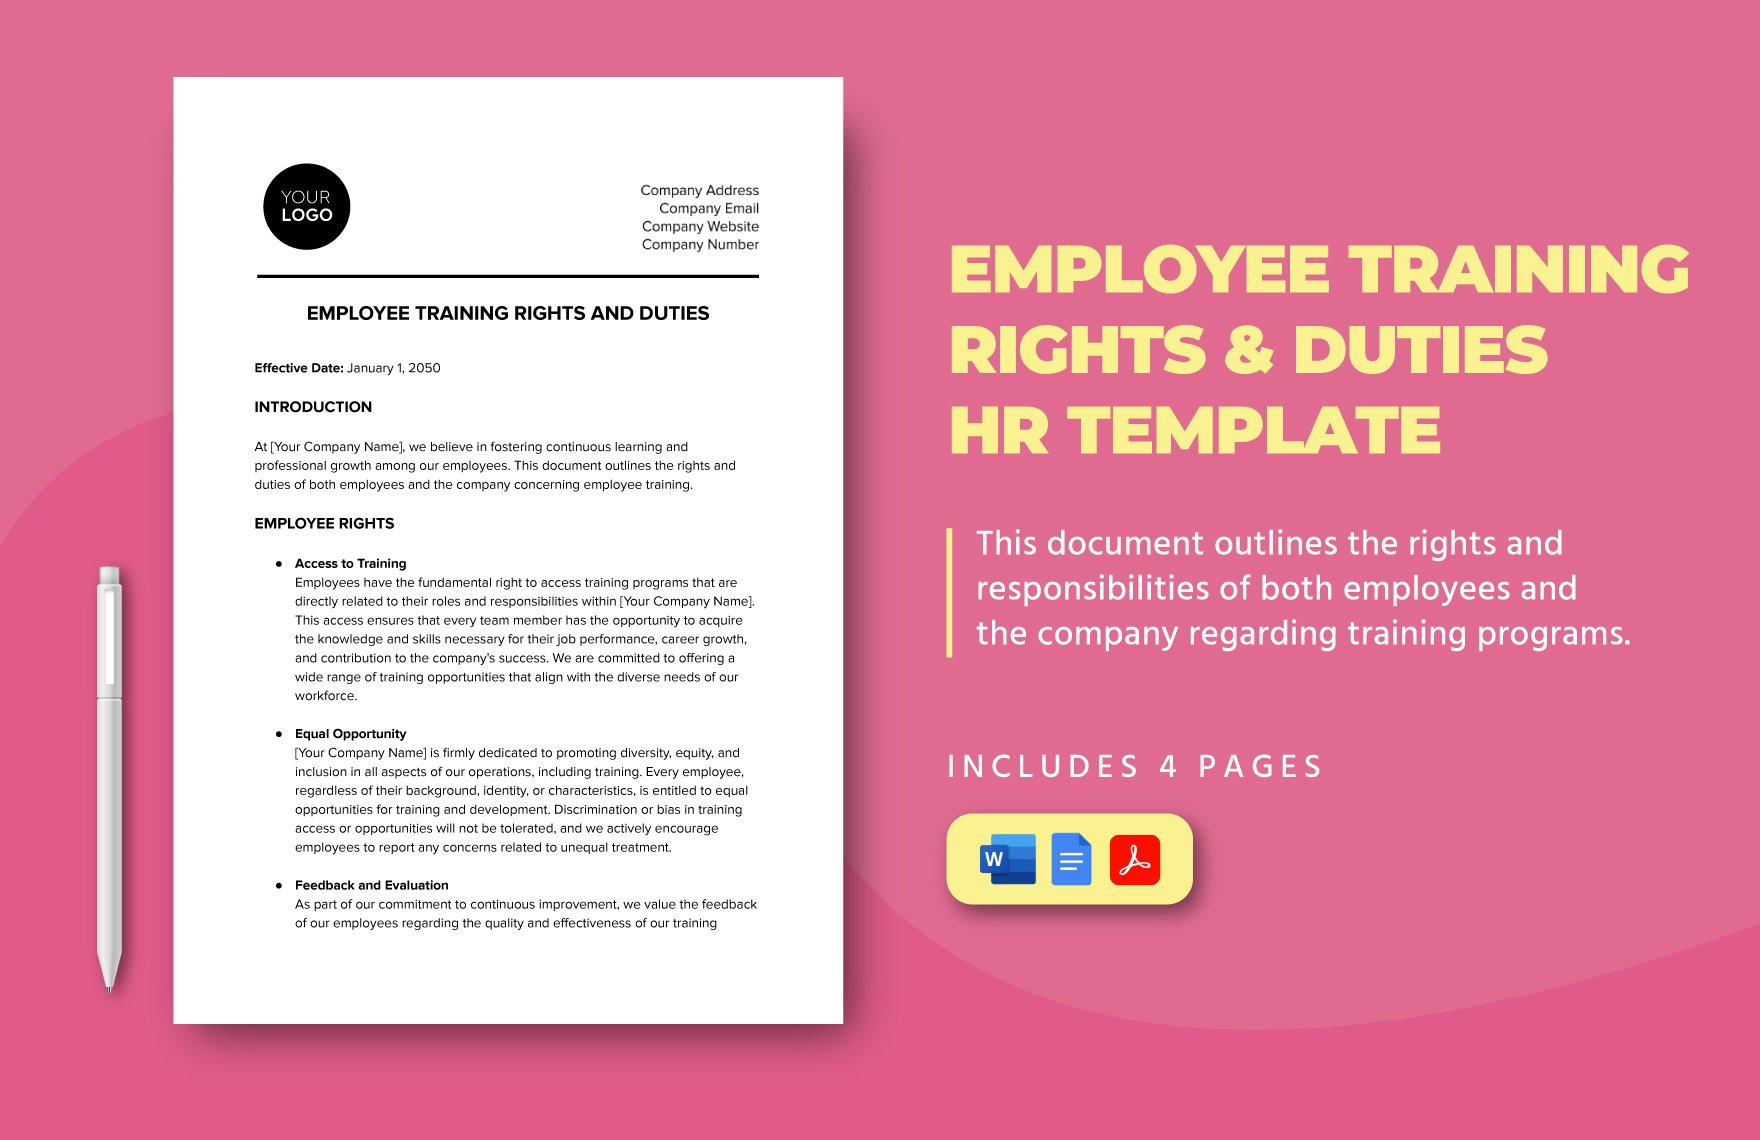 Employee Training Rights & Duties HR Template in Word, Google Docs, PDF